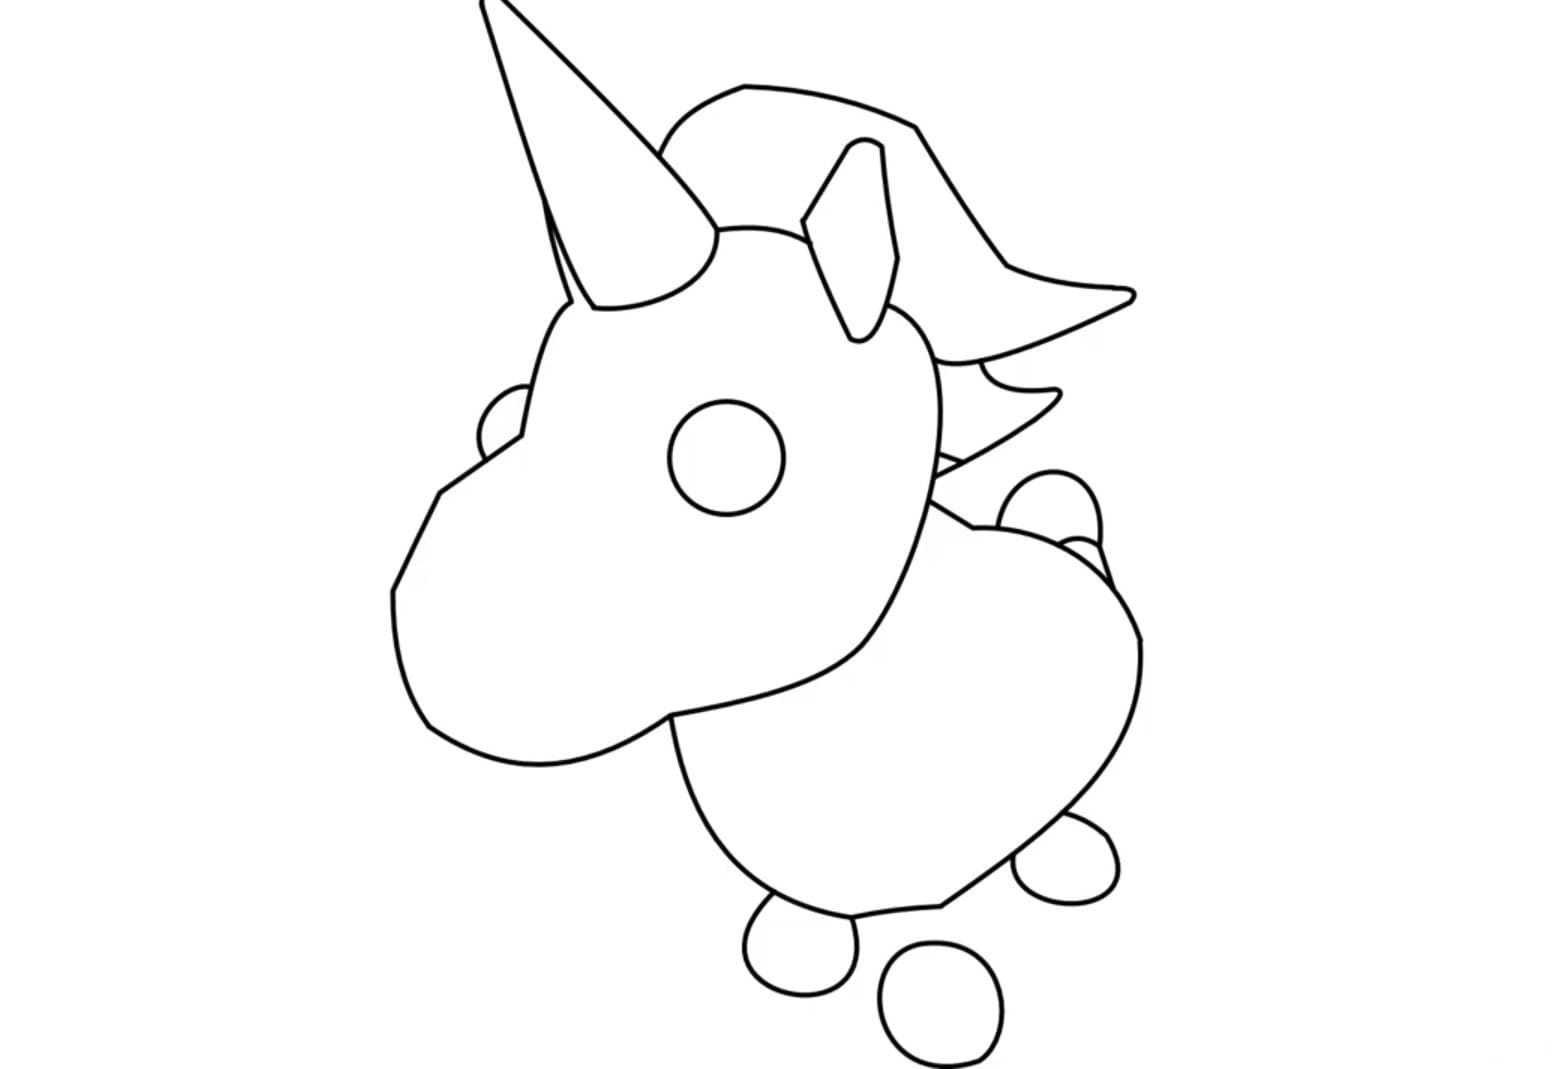 How to draw simple the Unicorn for toddlers Coloring Pages   Adopt ...